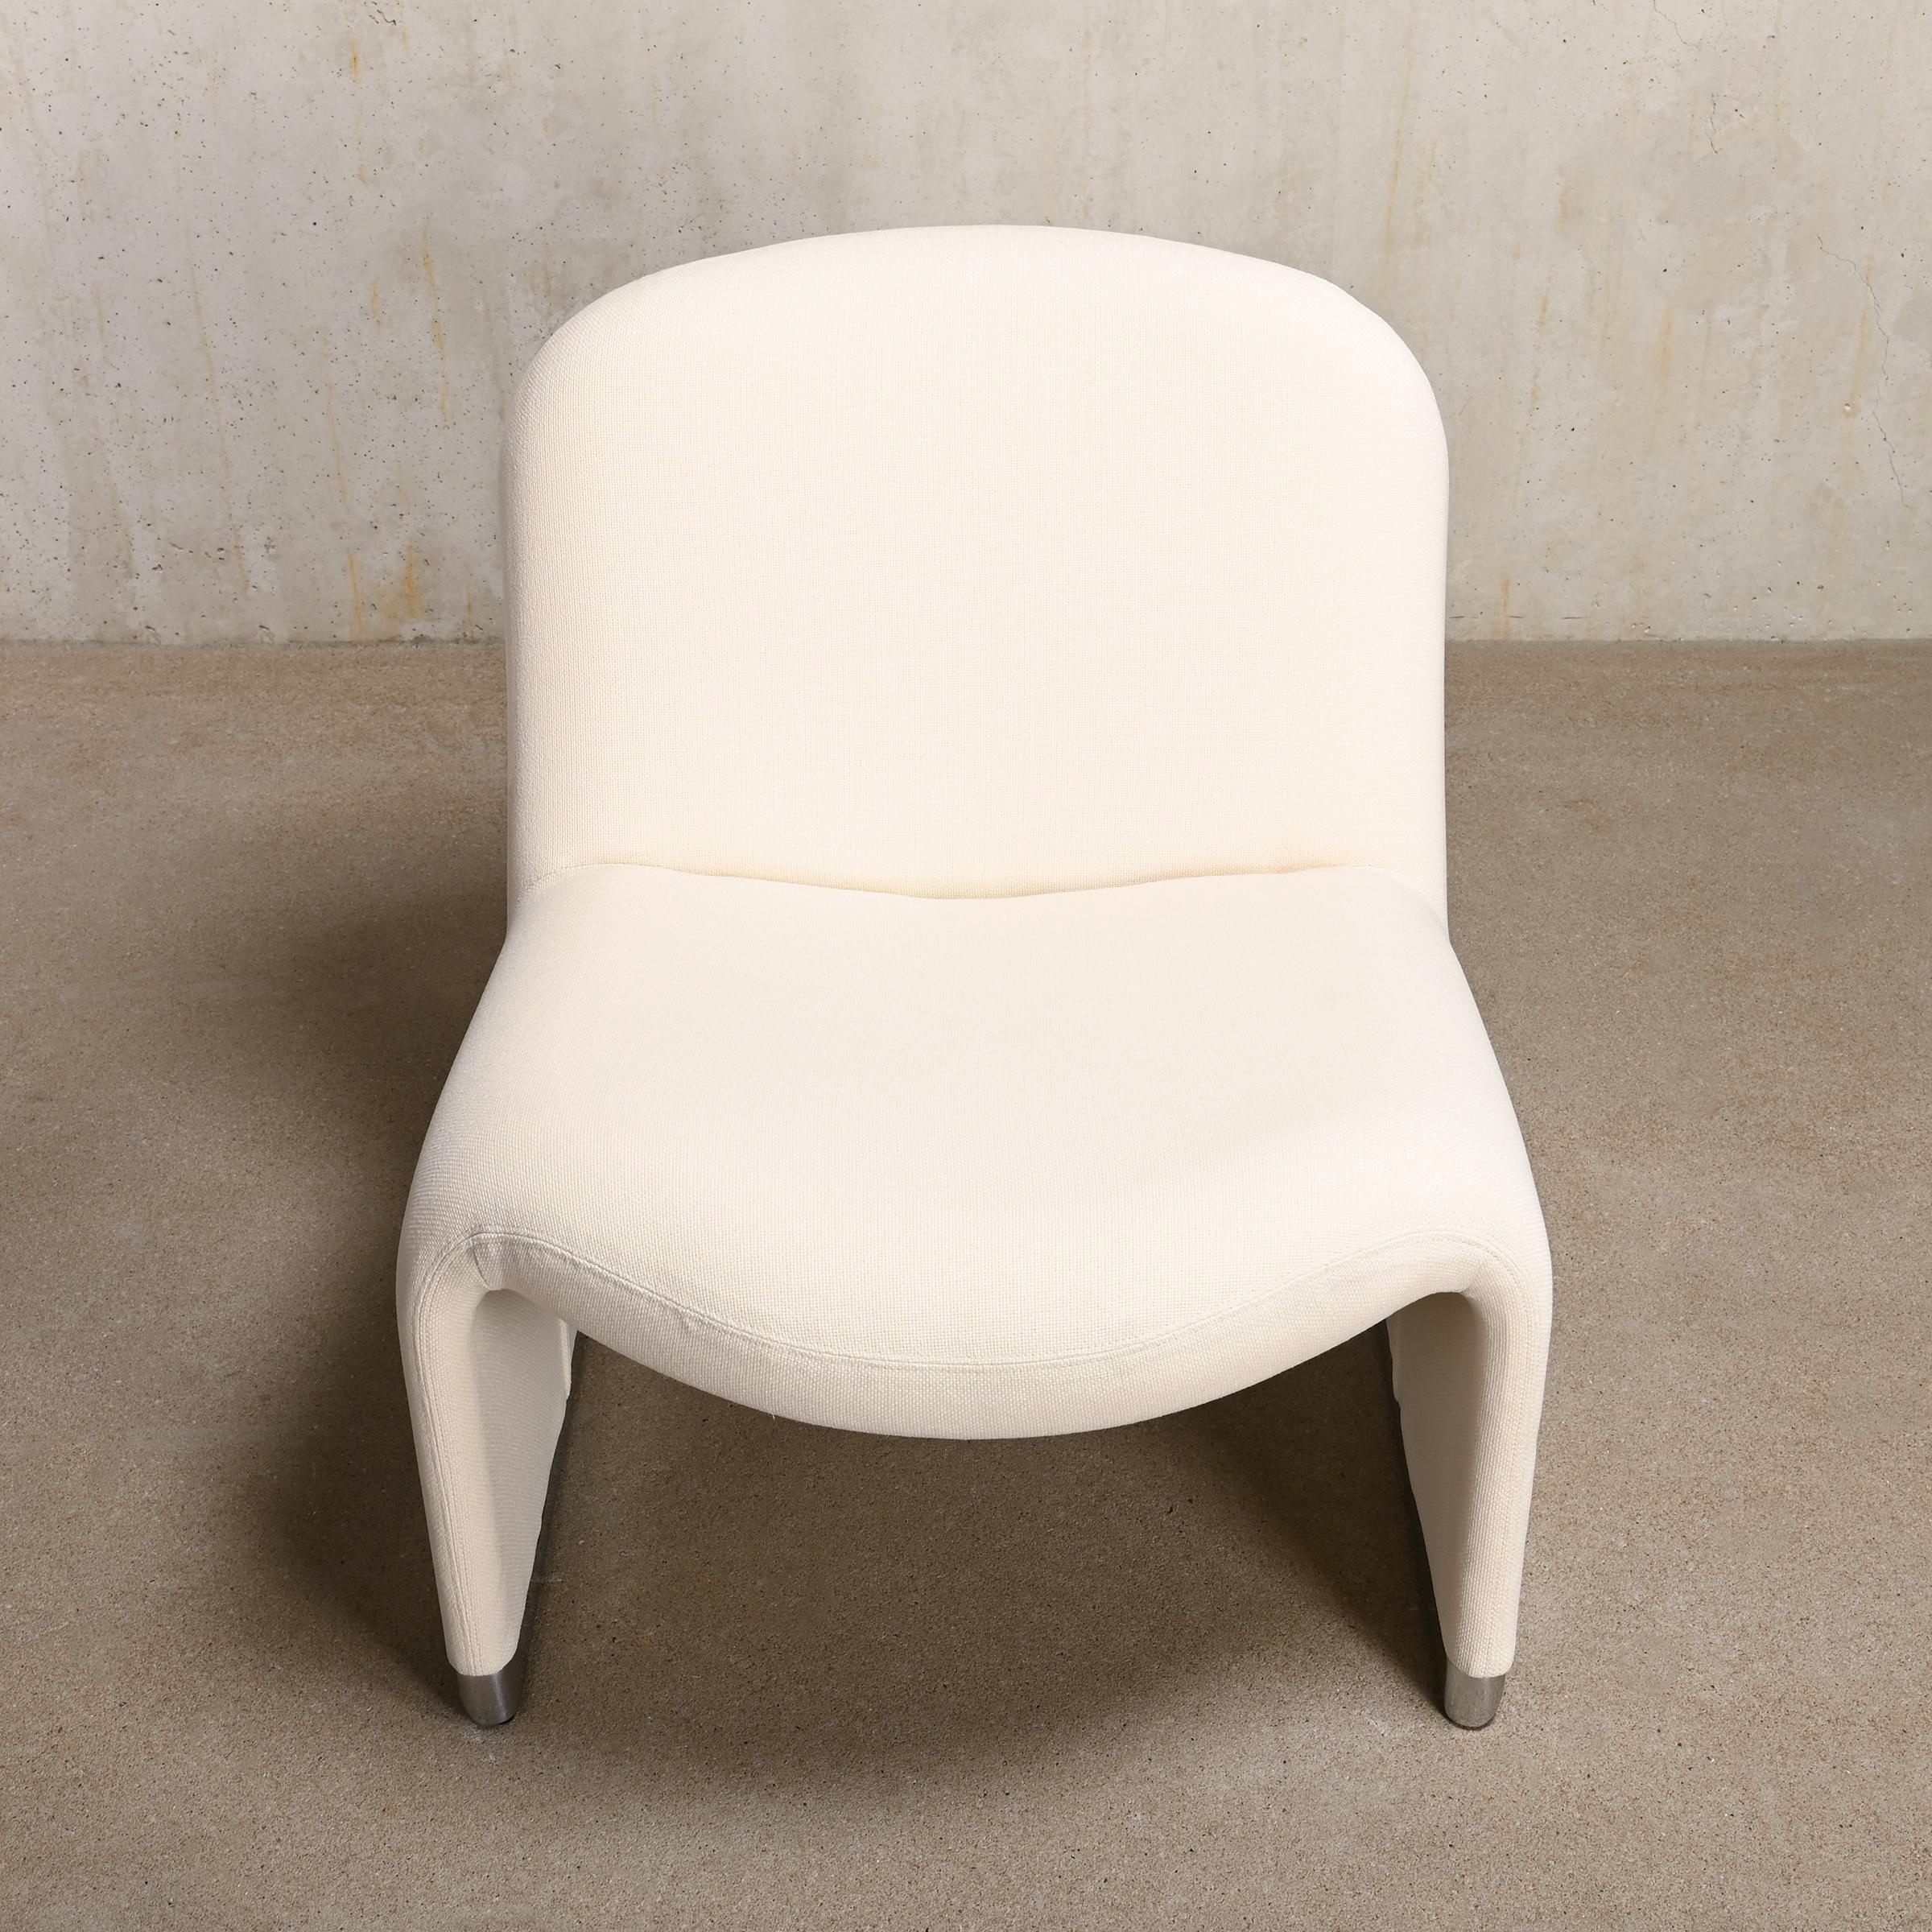 Mid-20th Century Giancarlo Piretti Alky Lounge Chair in White Fabric for Anonima Castelli For Sale